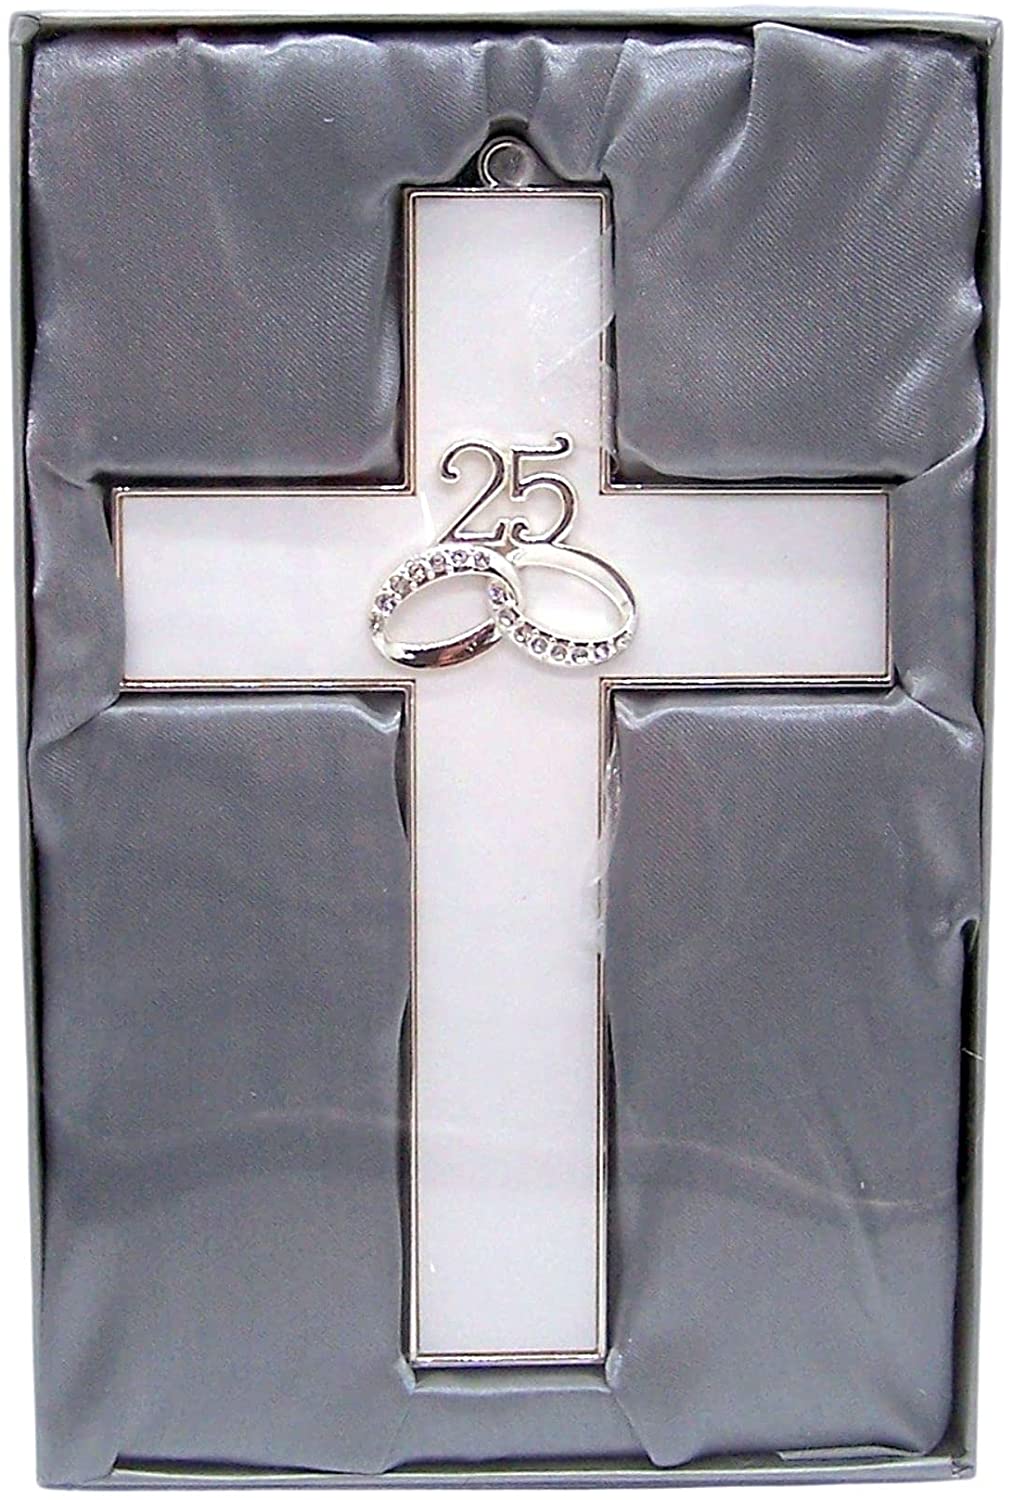 White Cross with a Silver Tone Trimmed, Features 2 Rings in the Center with 25 Above the Rings